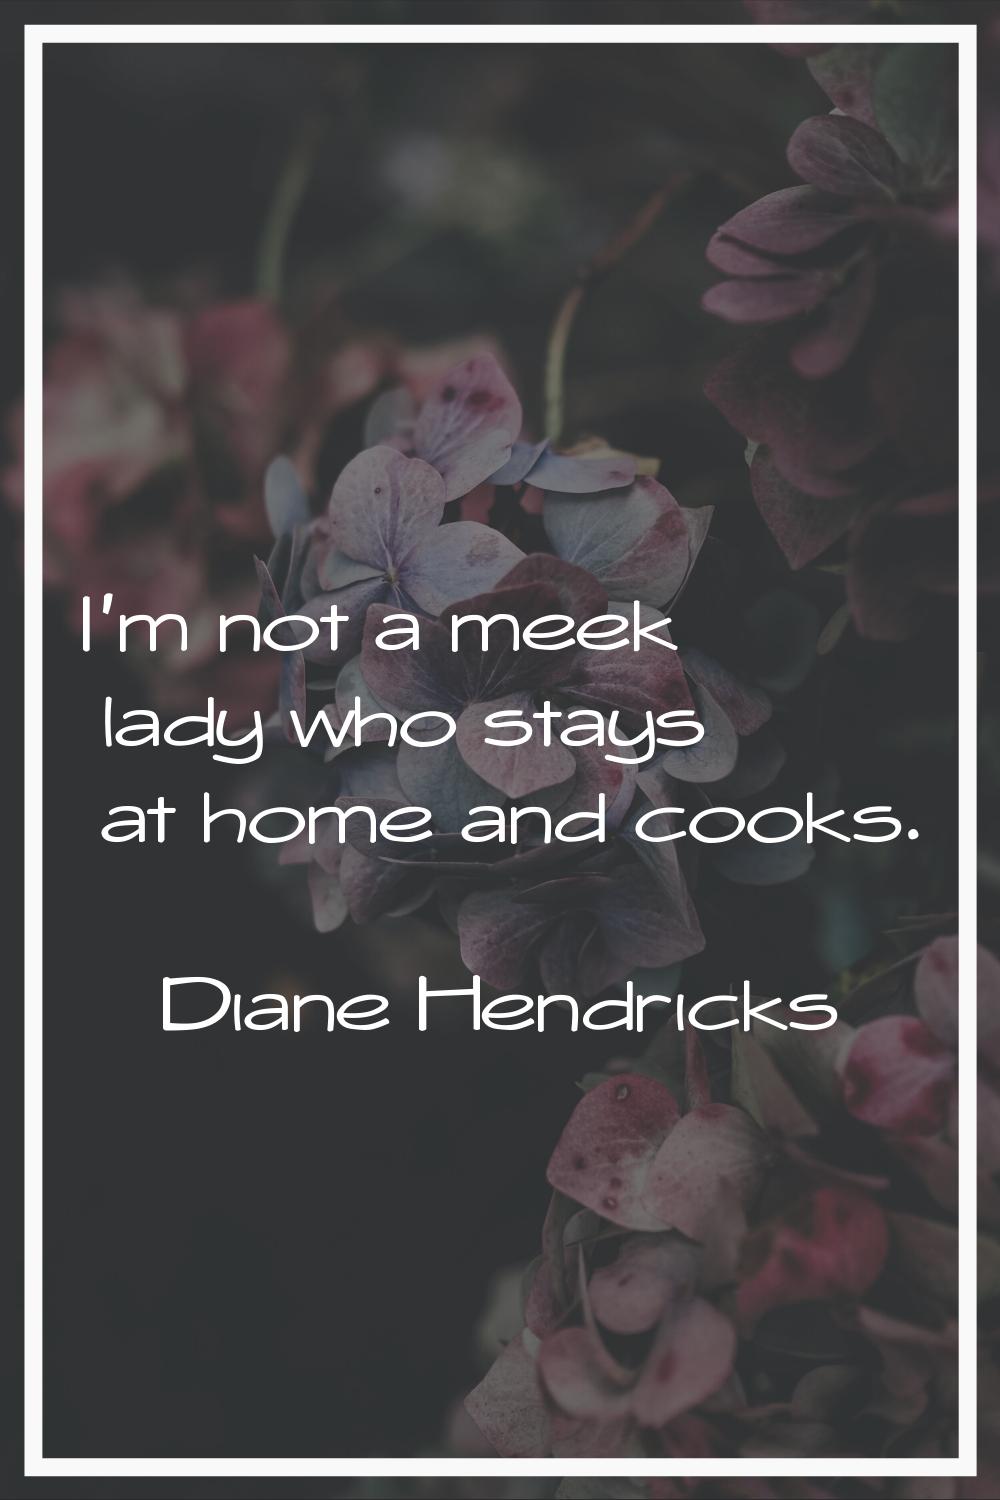 I'm not a meek lady who stays at home and cooks.